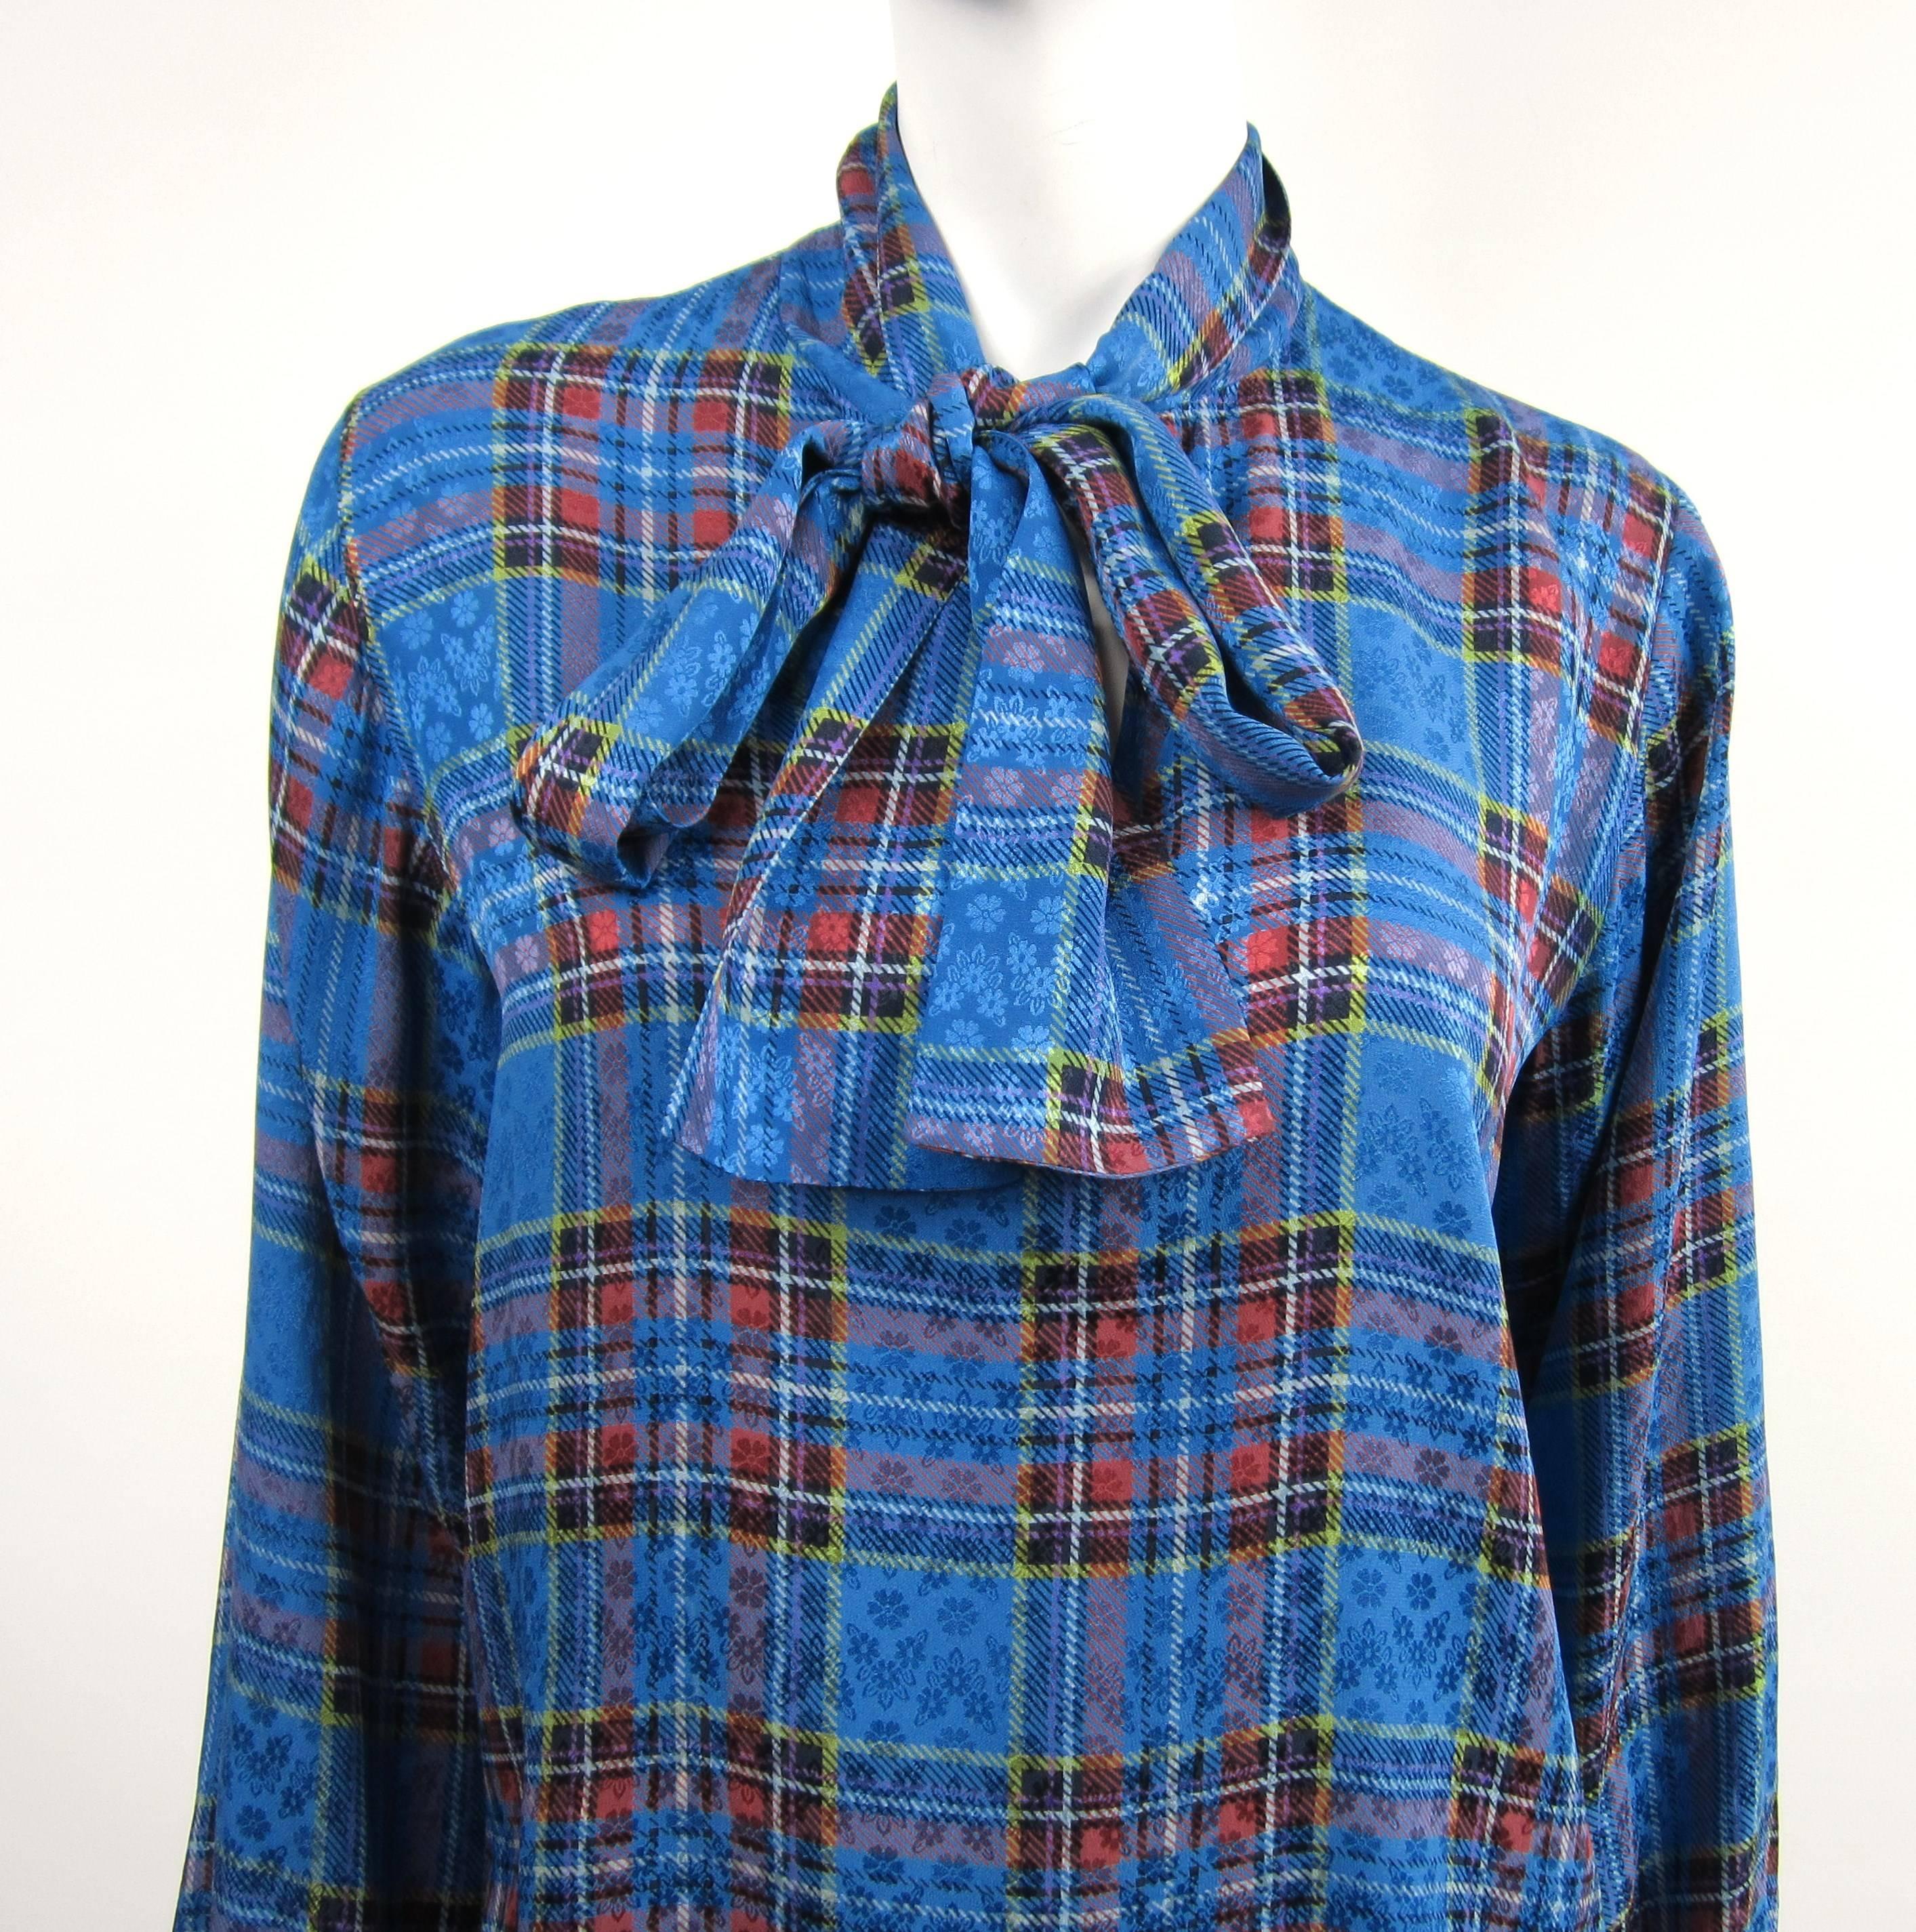 YSL Blue Silk Checkered Plaid Rive Gauche Silk Blouse with Scarf Bow on the neckline. No buttons, it slides overhead. Has Buttoned cuffs. Measuring- Up to 40 on the Bust - Up to 40 waist--- 25 inches long-- 23.5 long sleeve. This is out of a massive